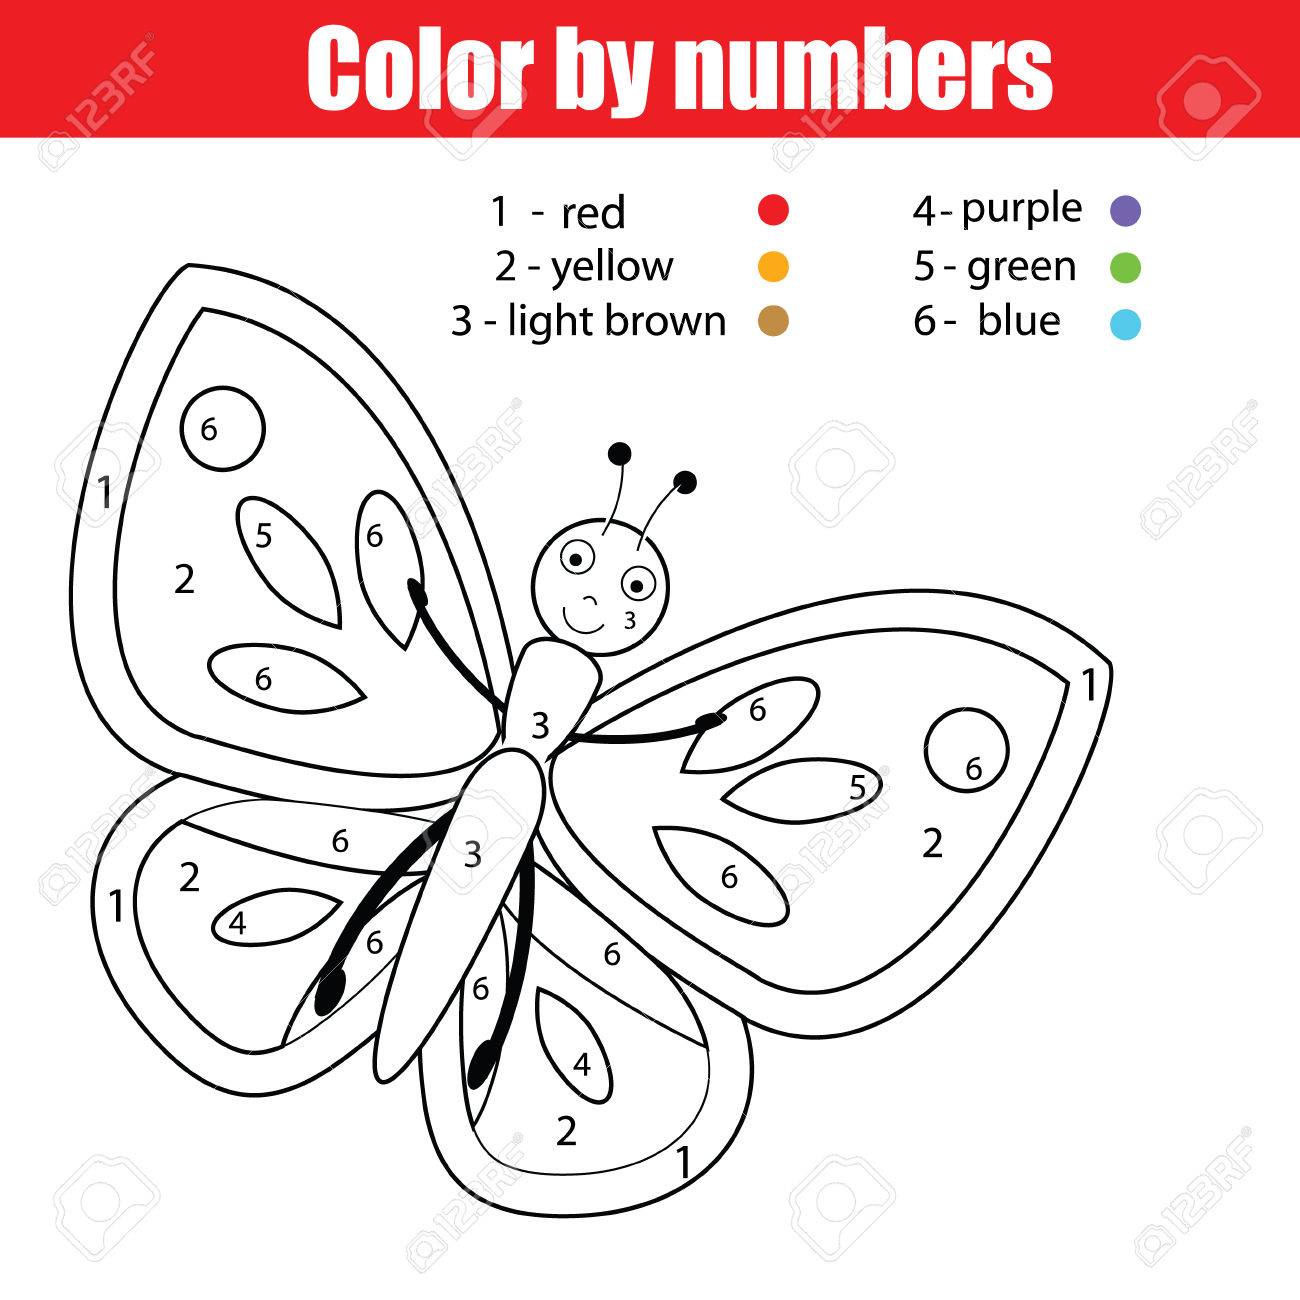 8-exciting-butterfly-color-by-number-worksheets-kitty-baby-love